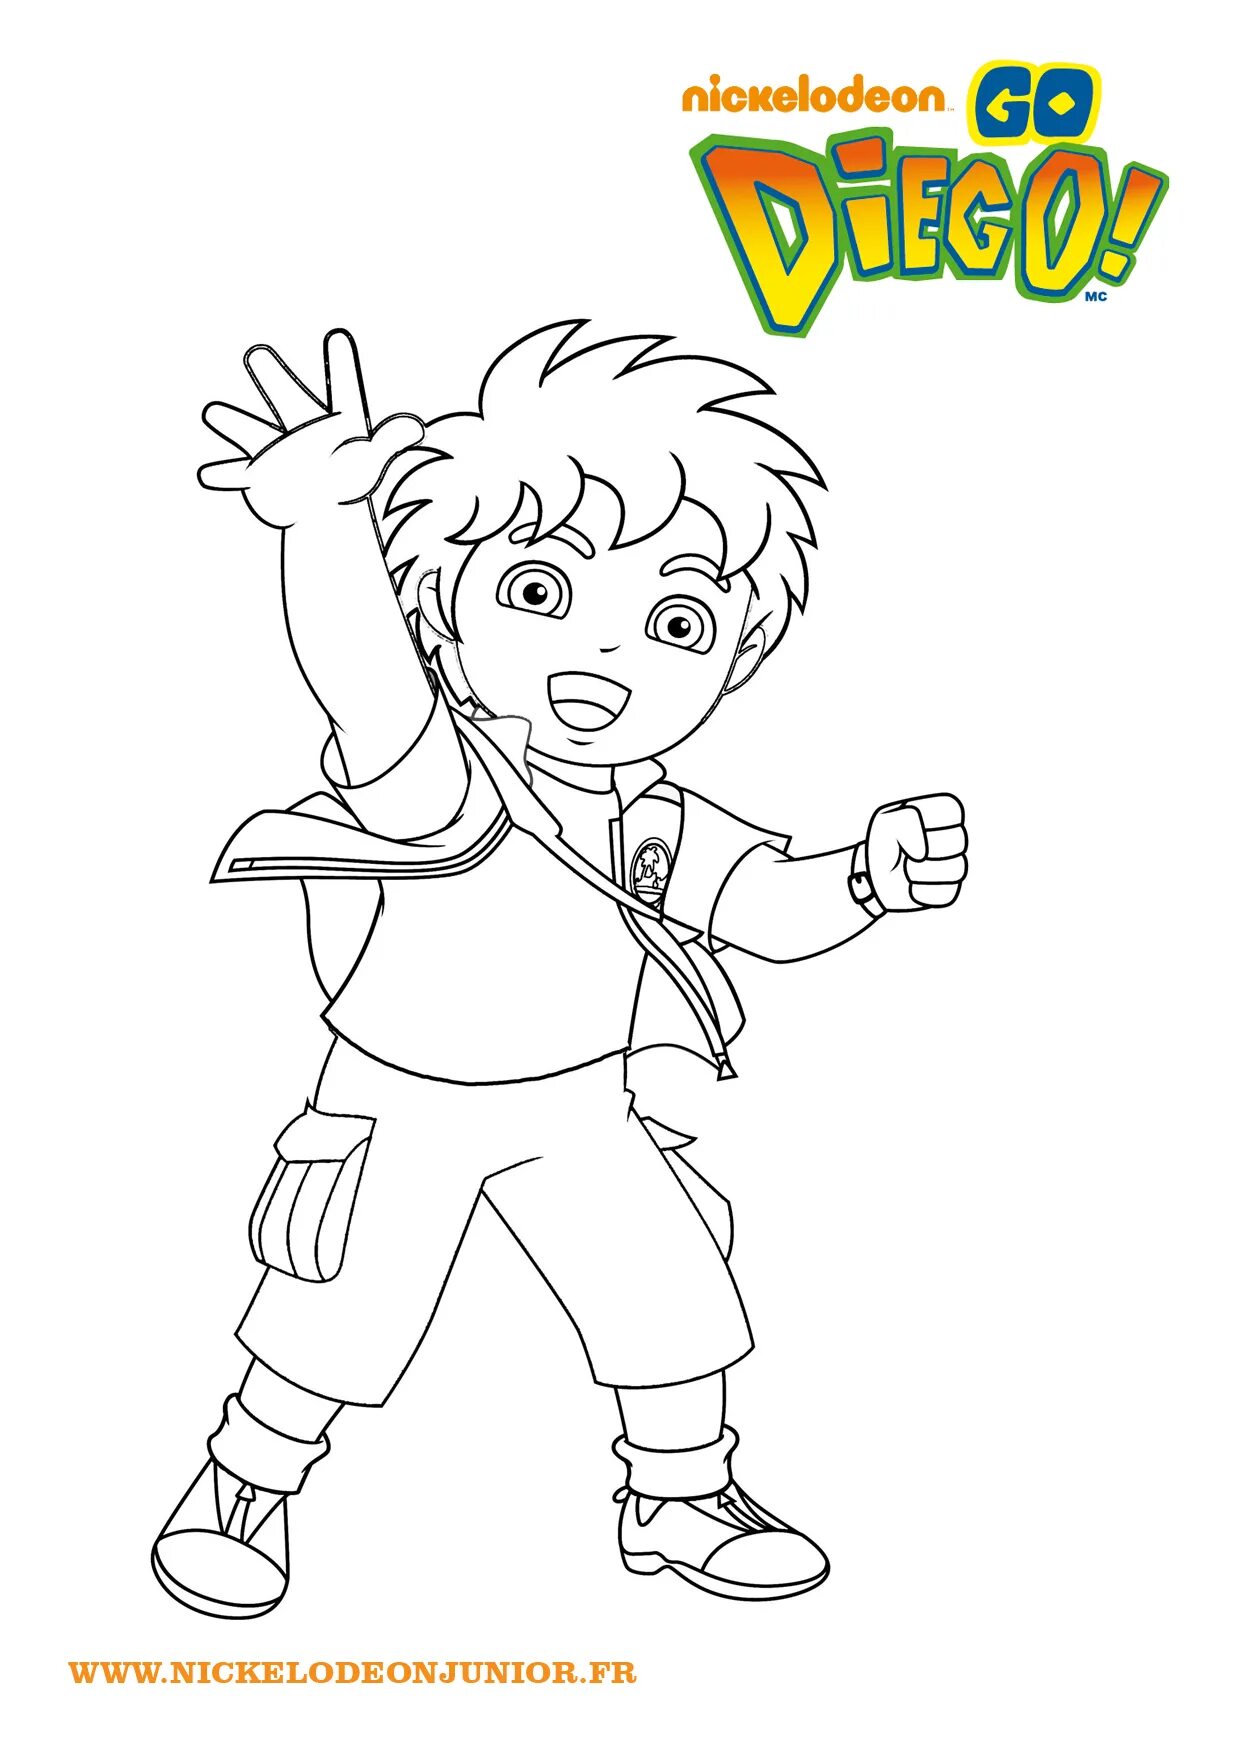 Charming diego coloring book